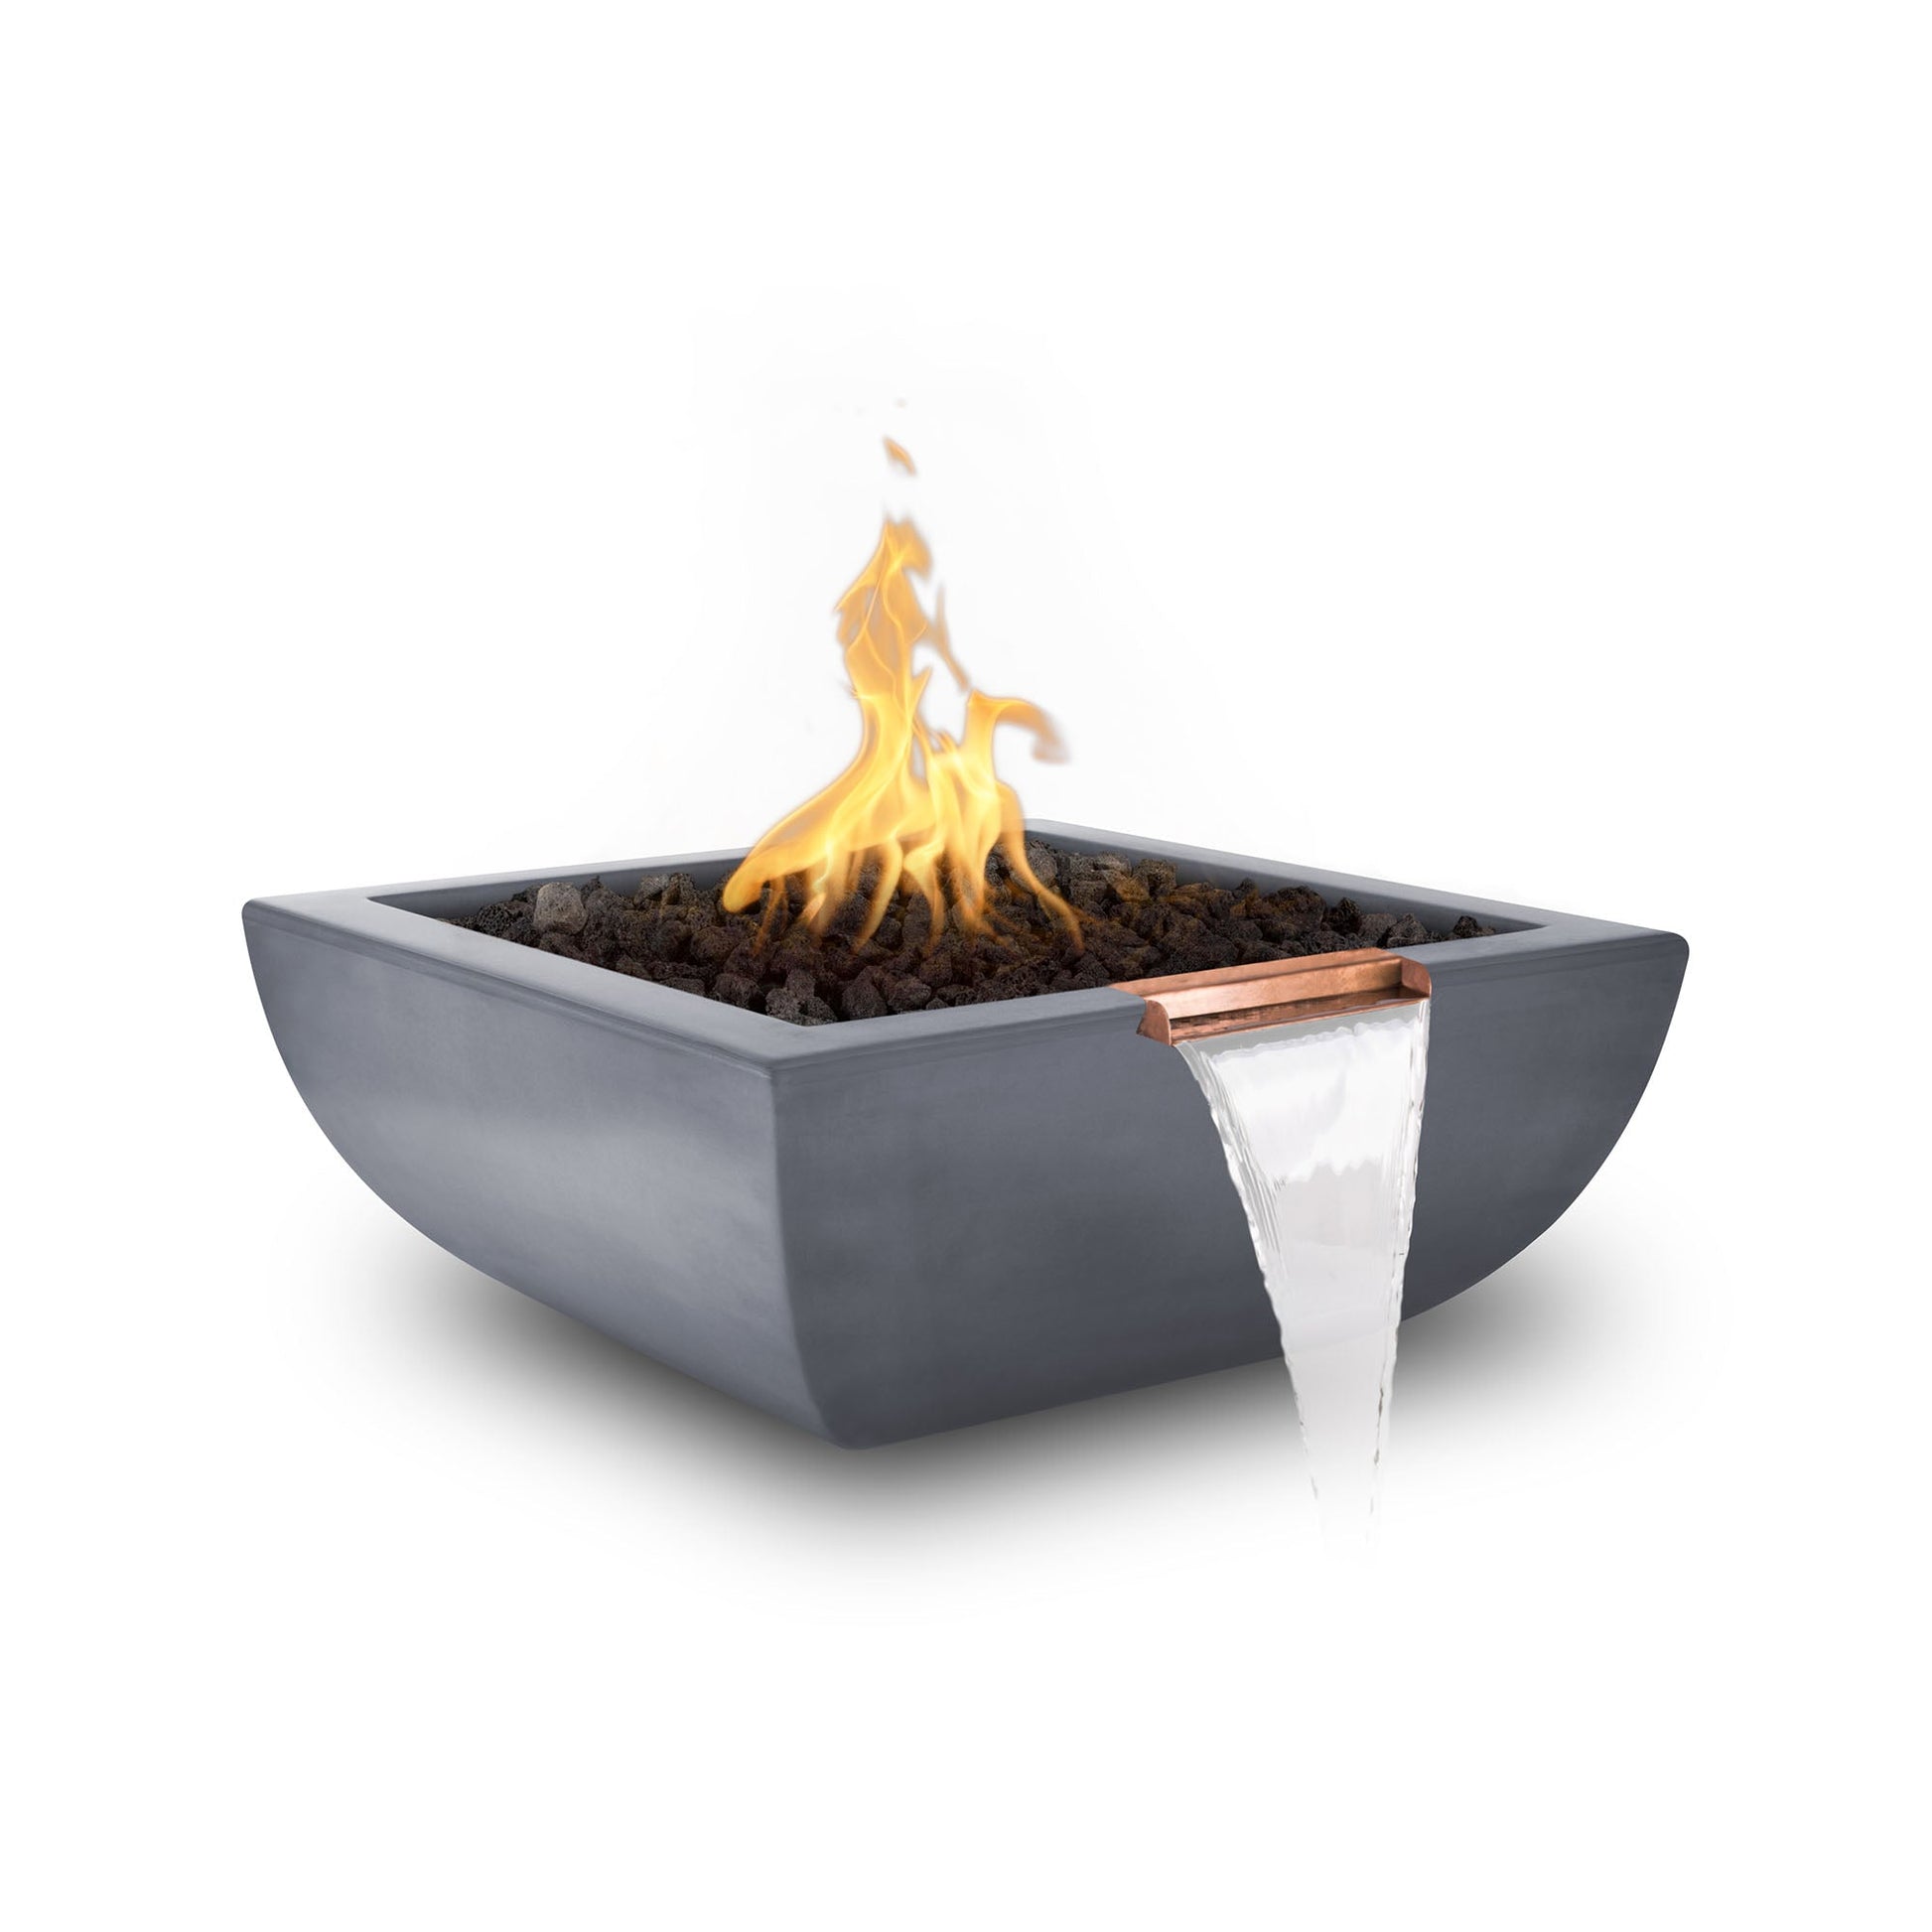 The Outdoor Plus Square Avalon 30" Rustic White GFRC Concrete Liquid Propane Fire & Water Bowl with Match Lit with Flame Sense Ignition